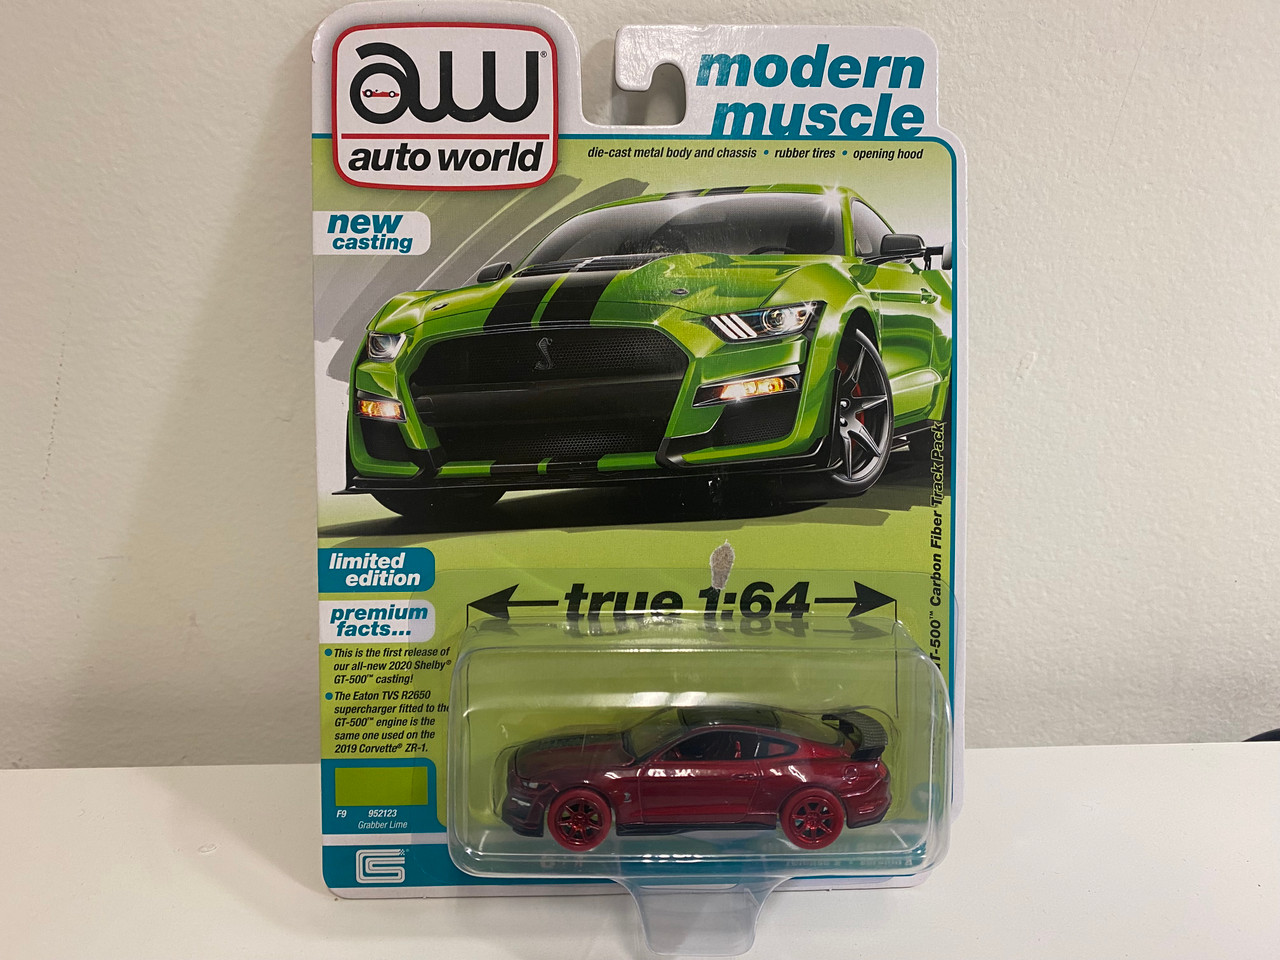 CHASE CAR 2020 Shelby GT500 Carbon Fiber Track Pack Red and Black Top "Modern Muscle" Limited Edition 1/64 Diecast Model Car by Auto World